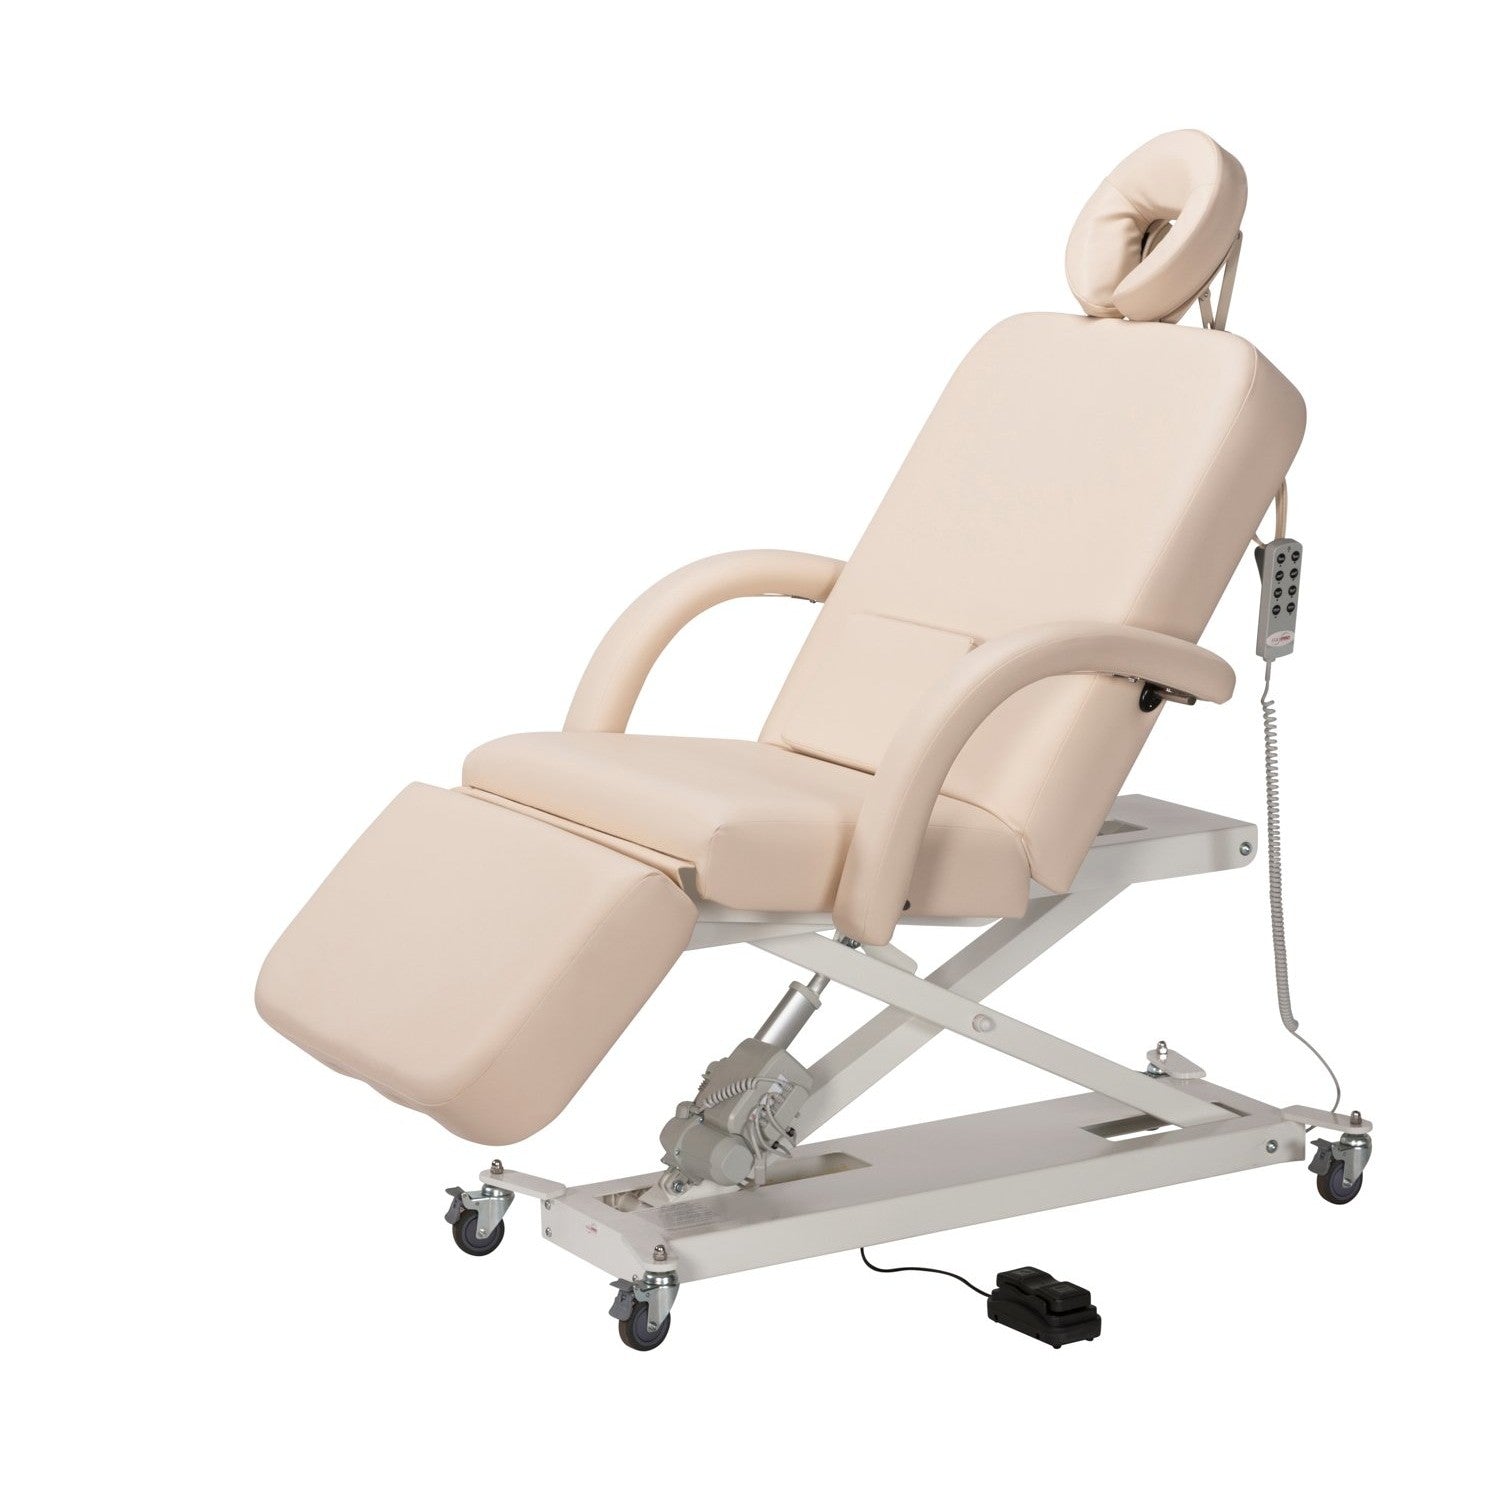 Equipro Equipro Infinity Electric Therapeutic Massage Facial Bed Massage & Treatment Table - ChairsThatGive